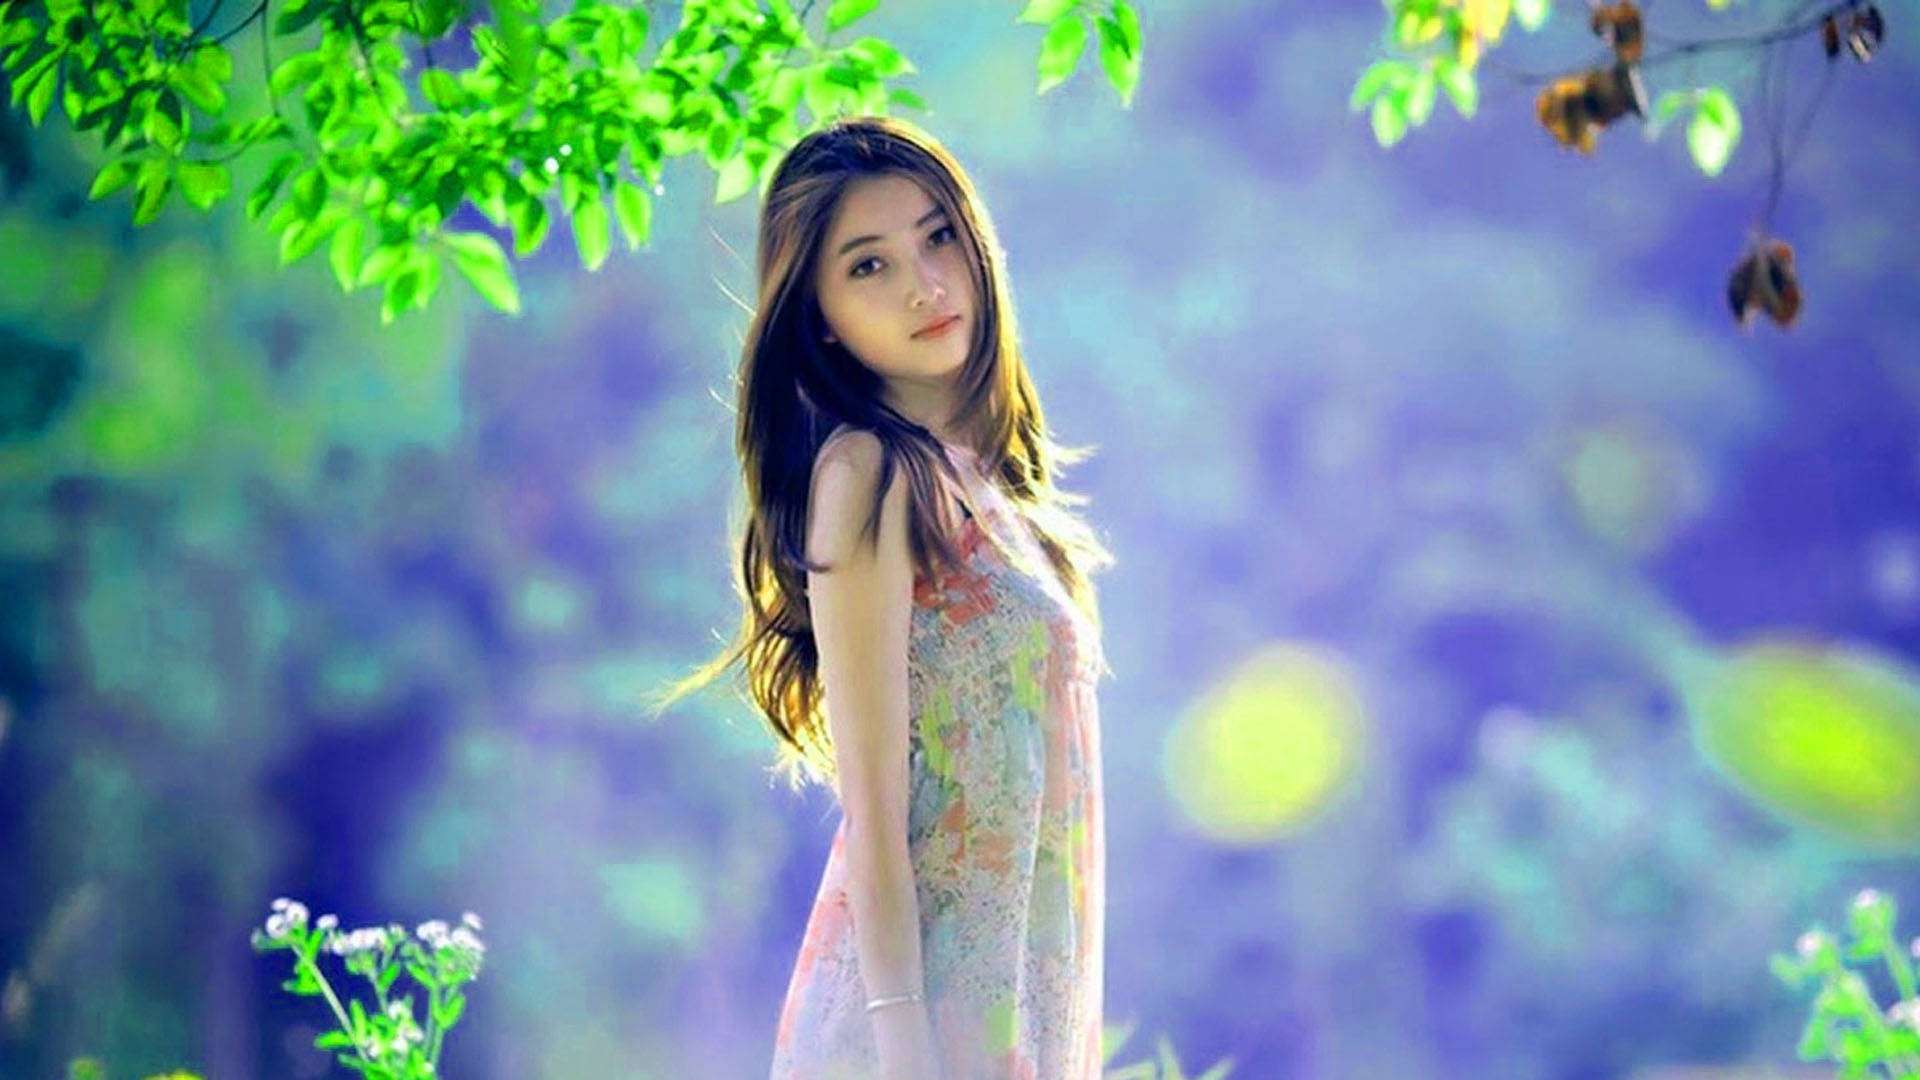 Chinese Woman In Sundress Wallpaper